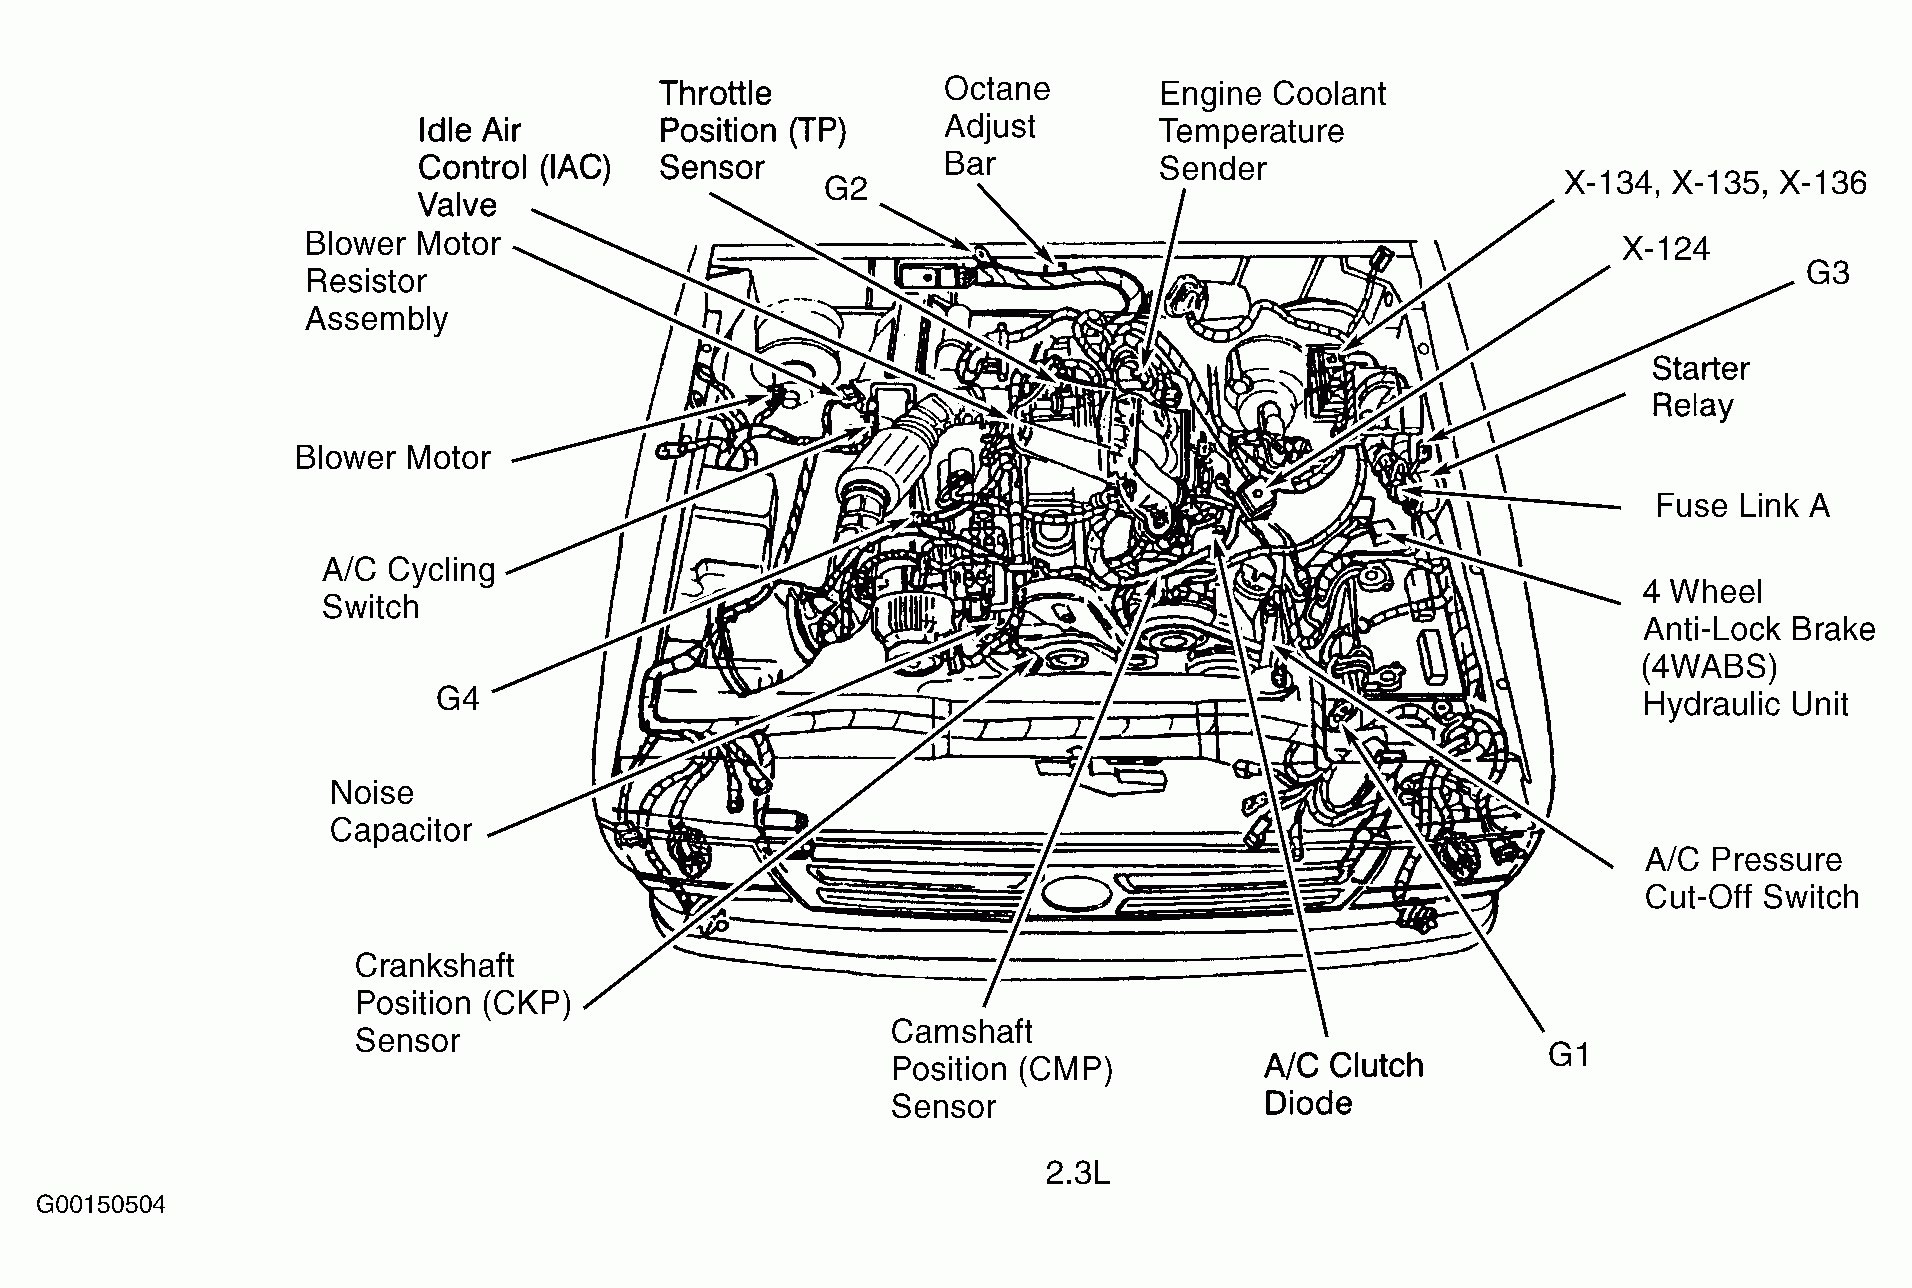 1999 ford Ranger Engine Diagram 1995 Mazda B3000 Engine Diagram Simple Guide About Wiring Of 1999 ford Ranger Engine Diagram